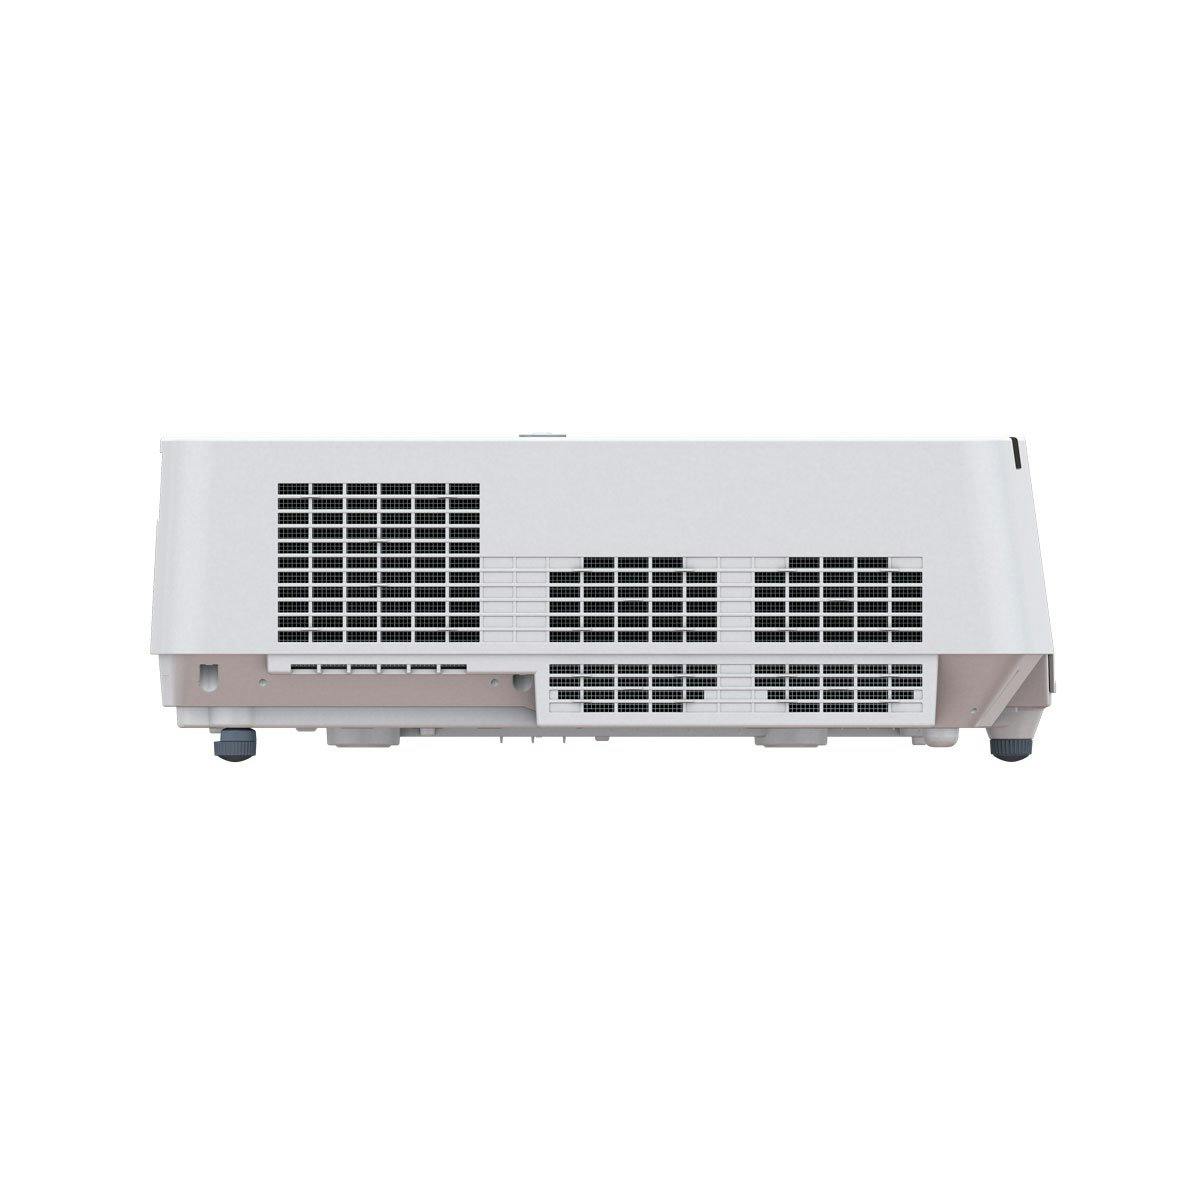 Christie LWU530-APS 3LCD laser projector | 121-054100-XX